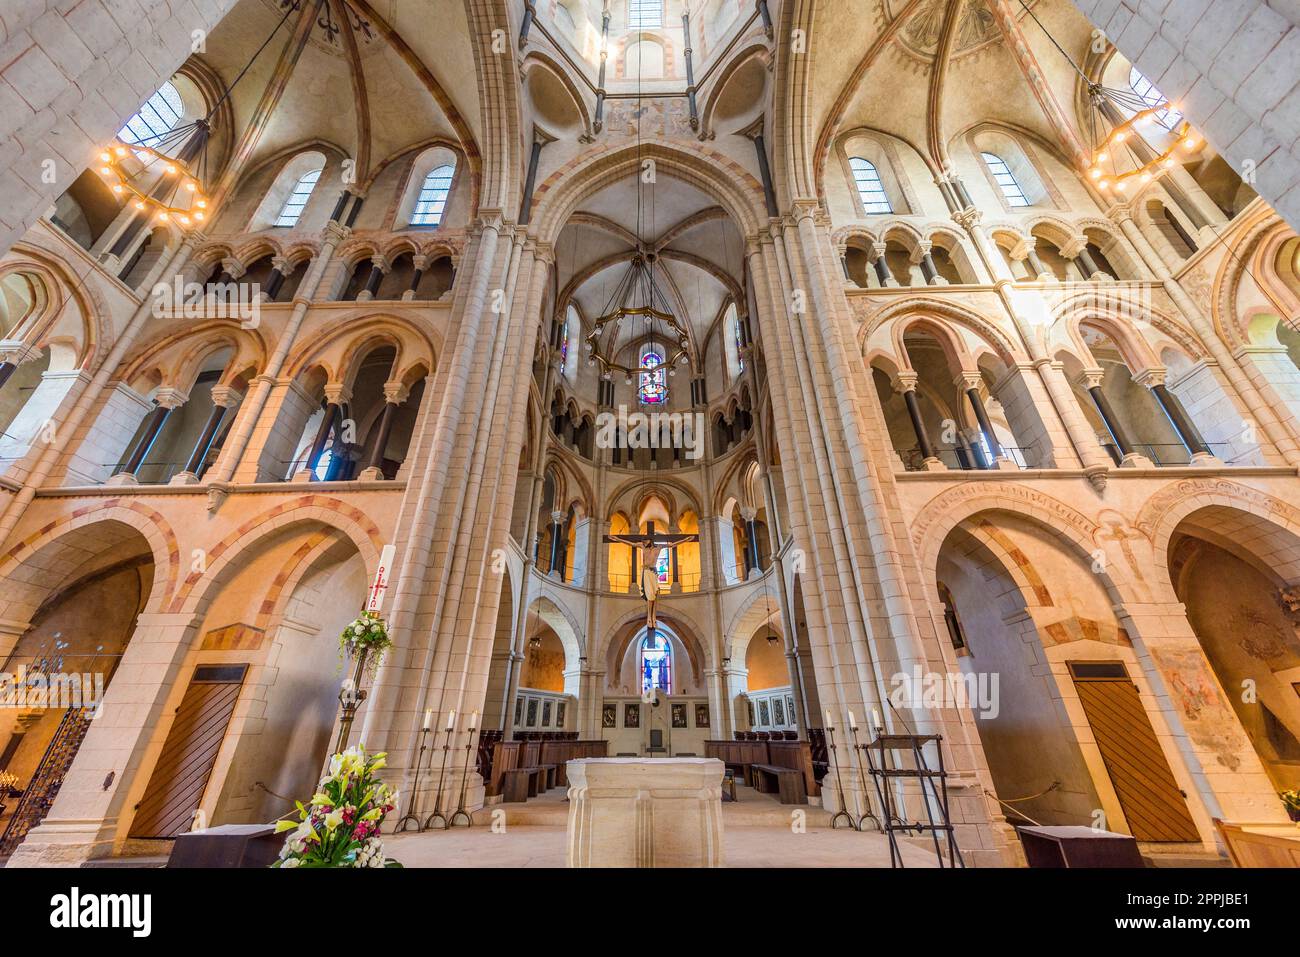 Interior with nave and aisle of Limburg Cathedral, Hesse, Germany Stock Photo